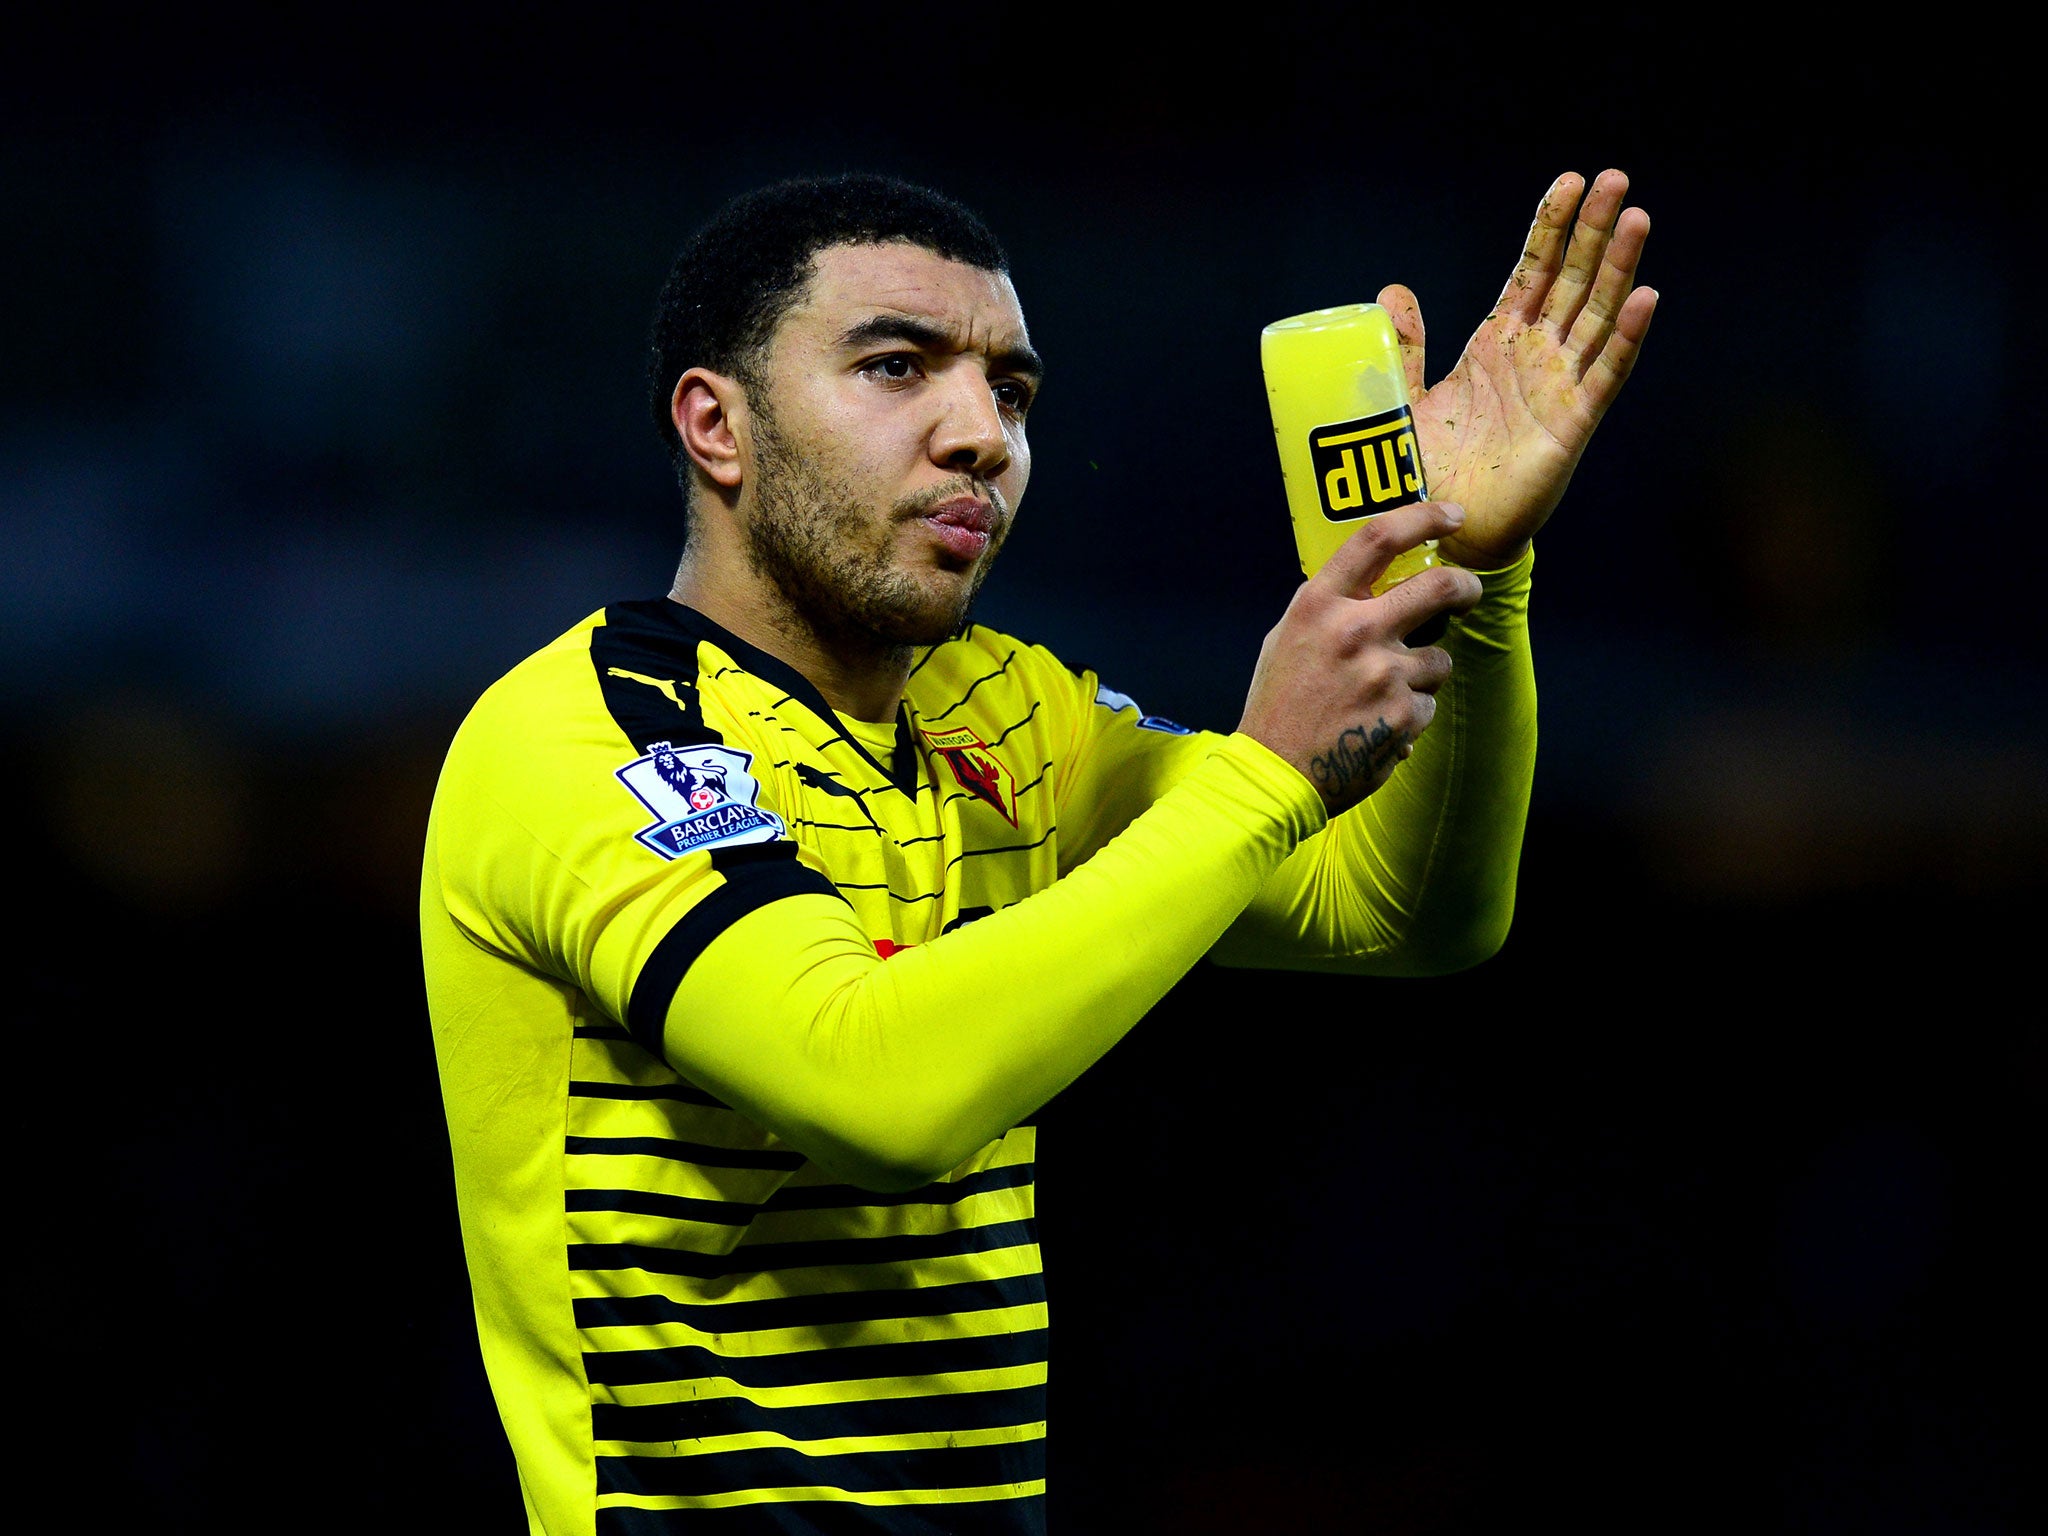 Troy Deeney is set to return to the Watford starting line-up